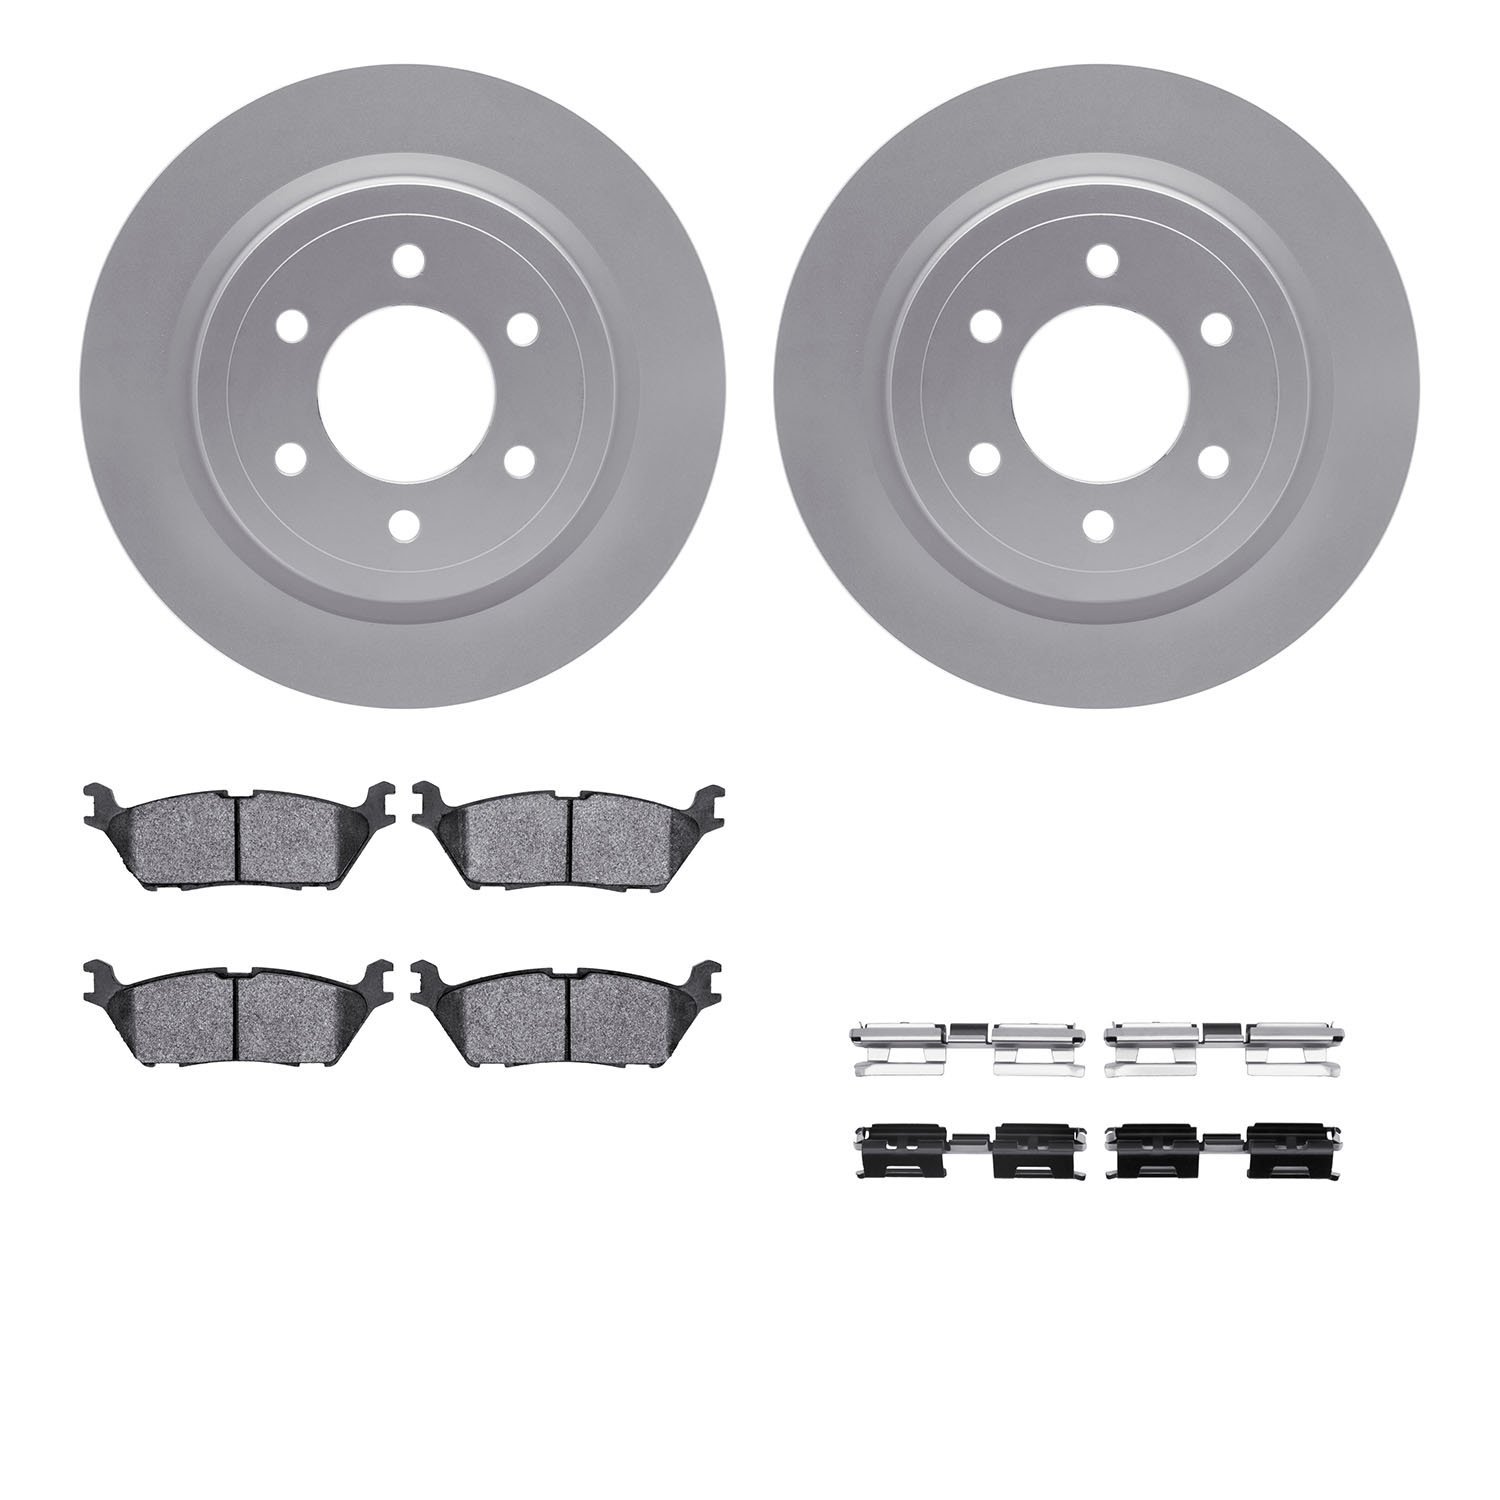 4412-54080 Geospec Brake Rotors with Ultimate-Duty Brake Pads & Hardware, 2018-2021 Ford/Lincoln/Mercury/Mazda, Position: Rear